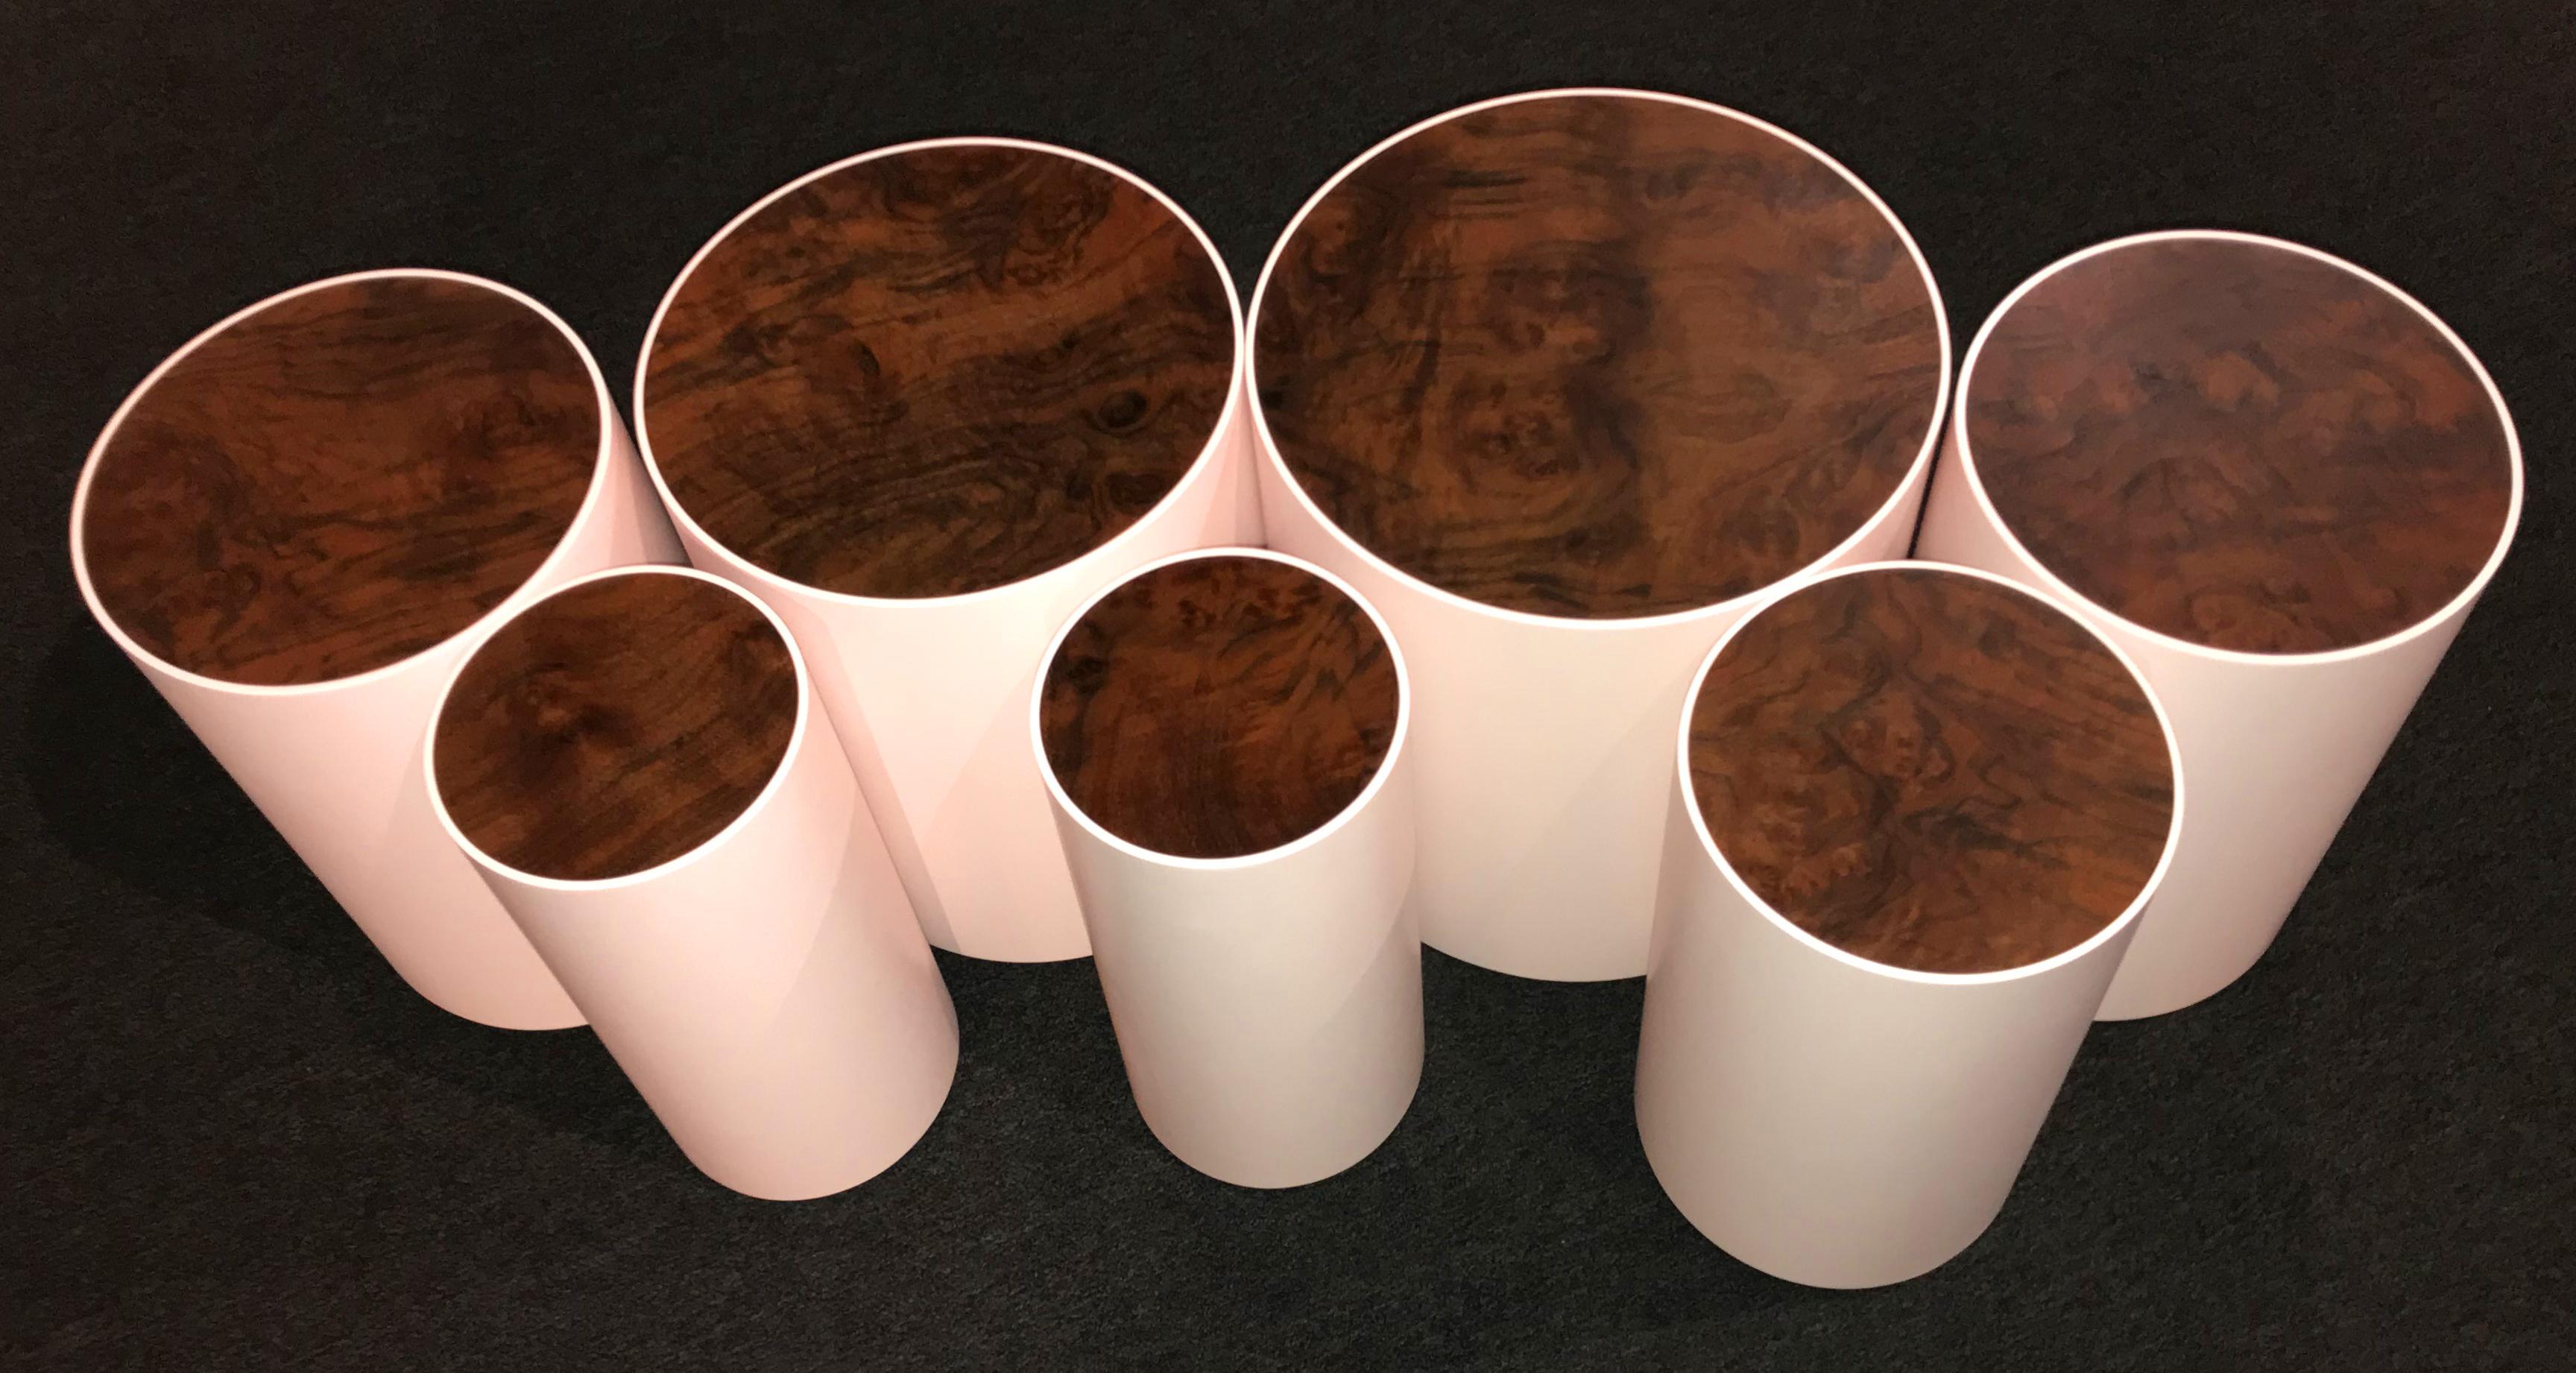 A fine custom modernist set of seven drum tables, handcrafted by Peter Sandback. Sandback has gained a national reputation for his intricate pattern work of inlaid nails set into Minimalist handmade tables, benches and other functional forms that he